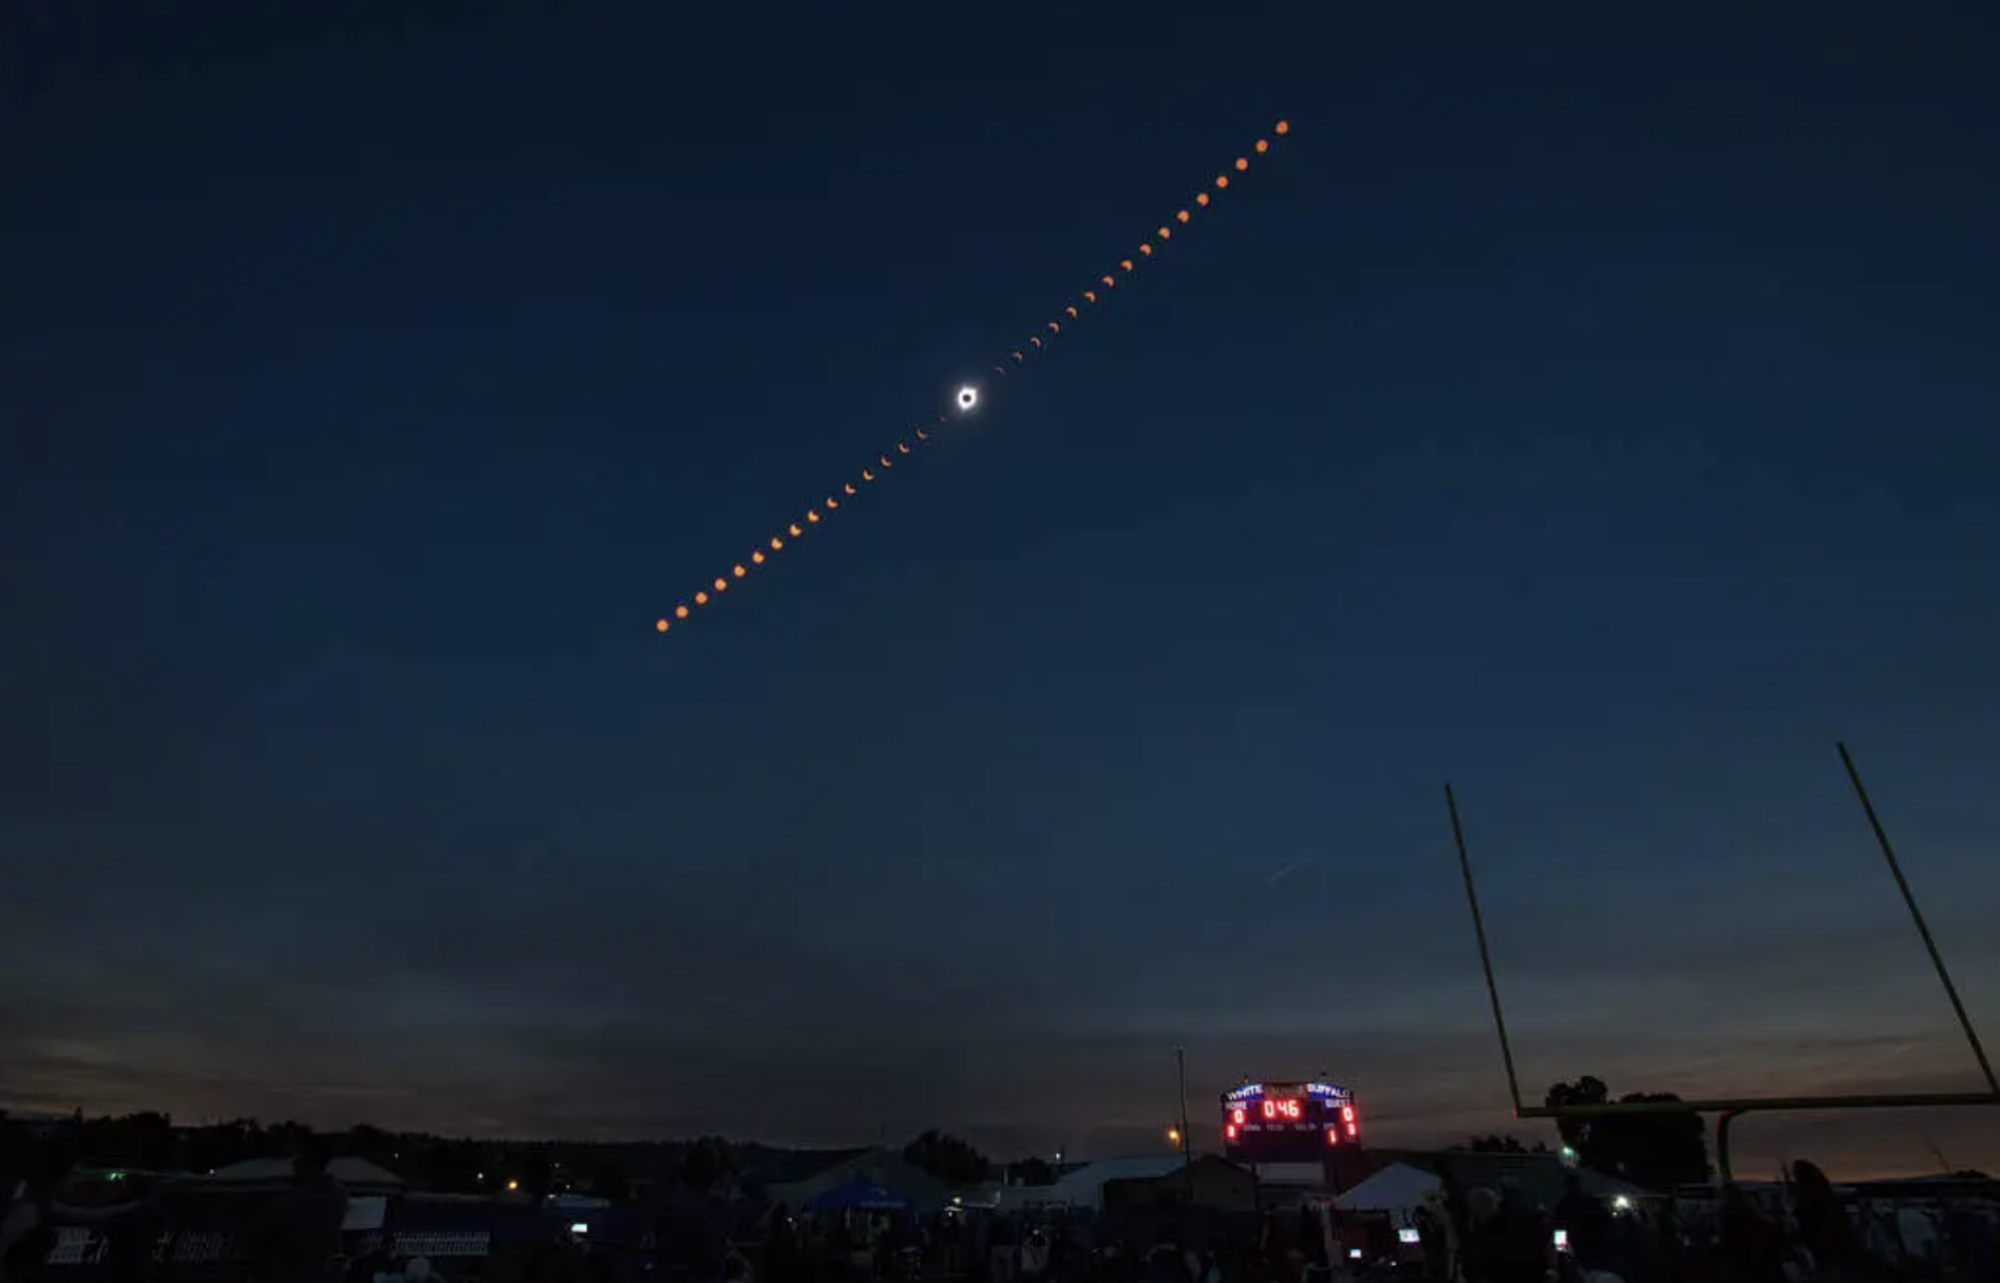 A time-lapse of the moon eclipsing the sun in August 2017 during a total solar eclipse.